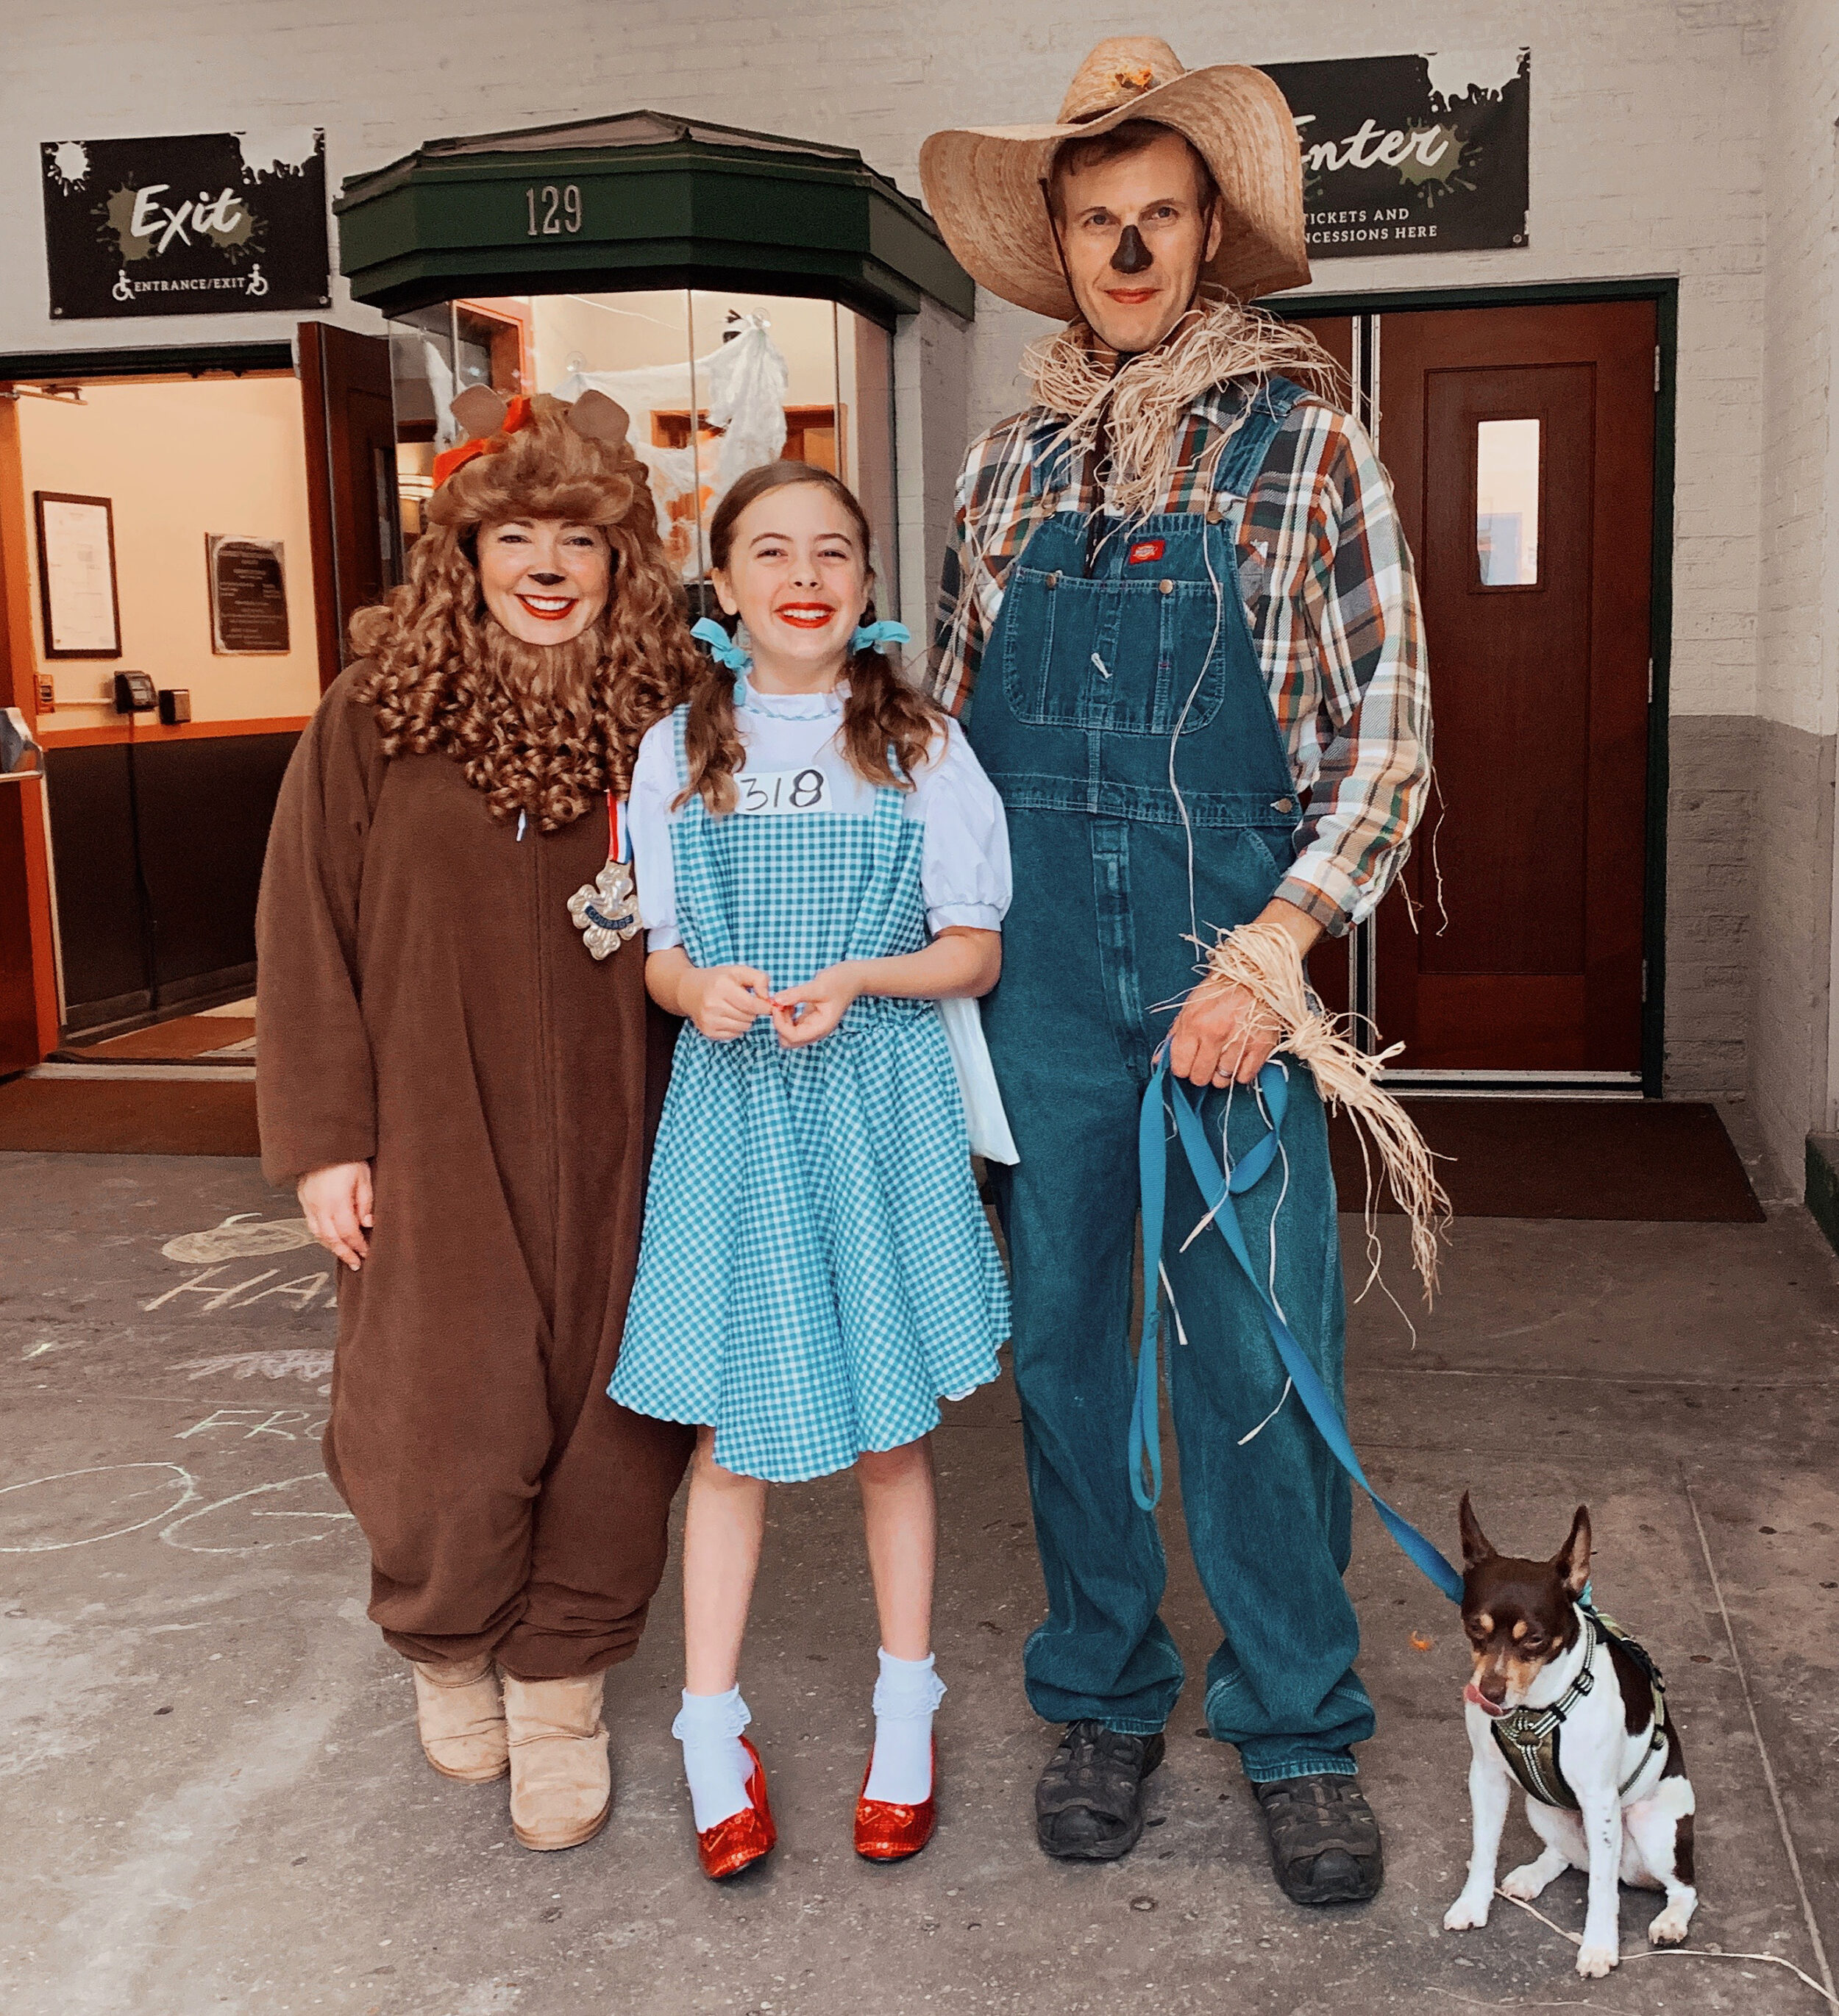 Family Wizard of Oz Costume for Halloween